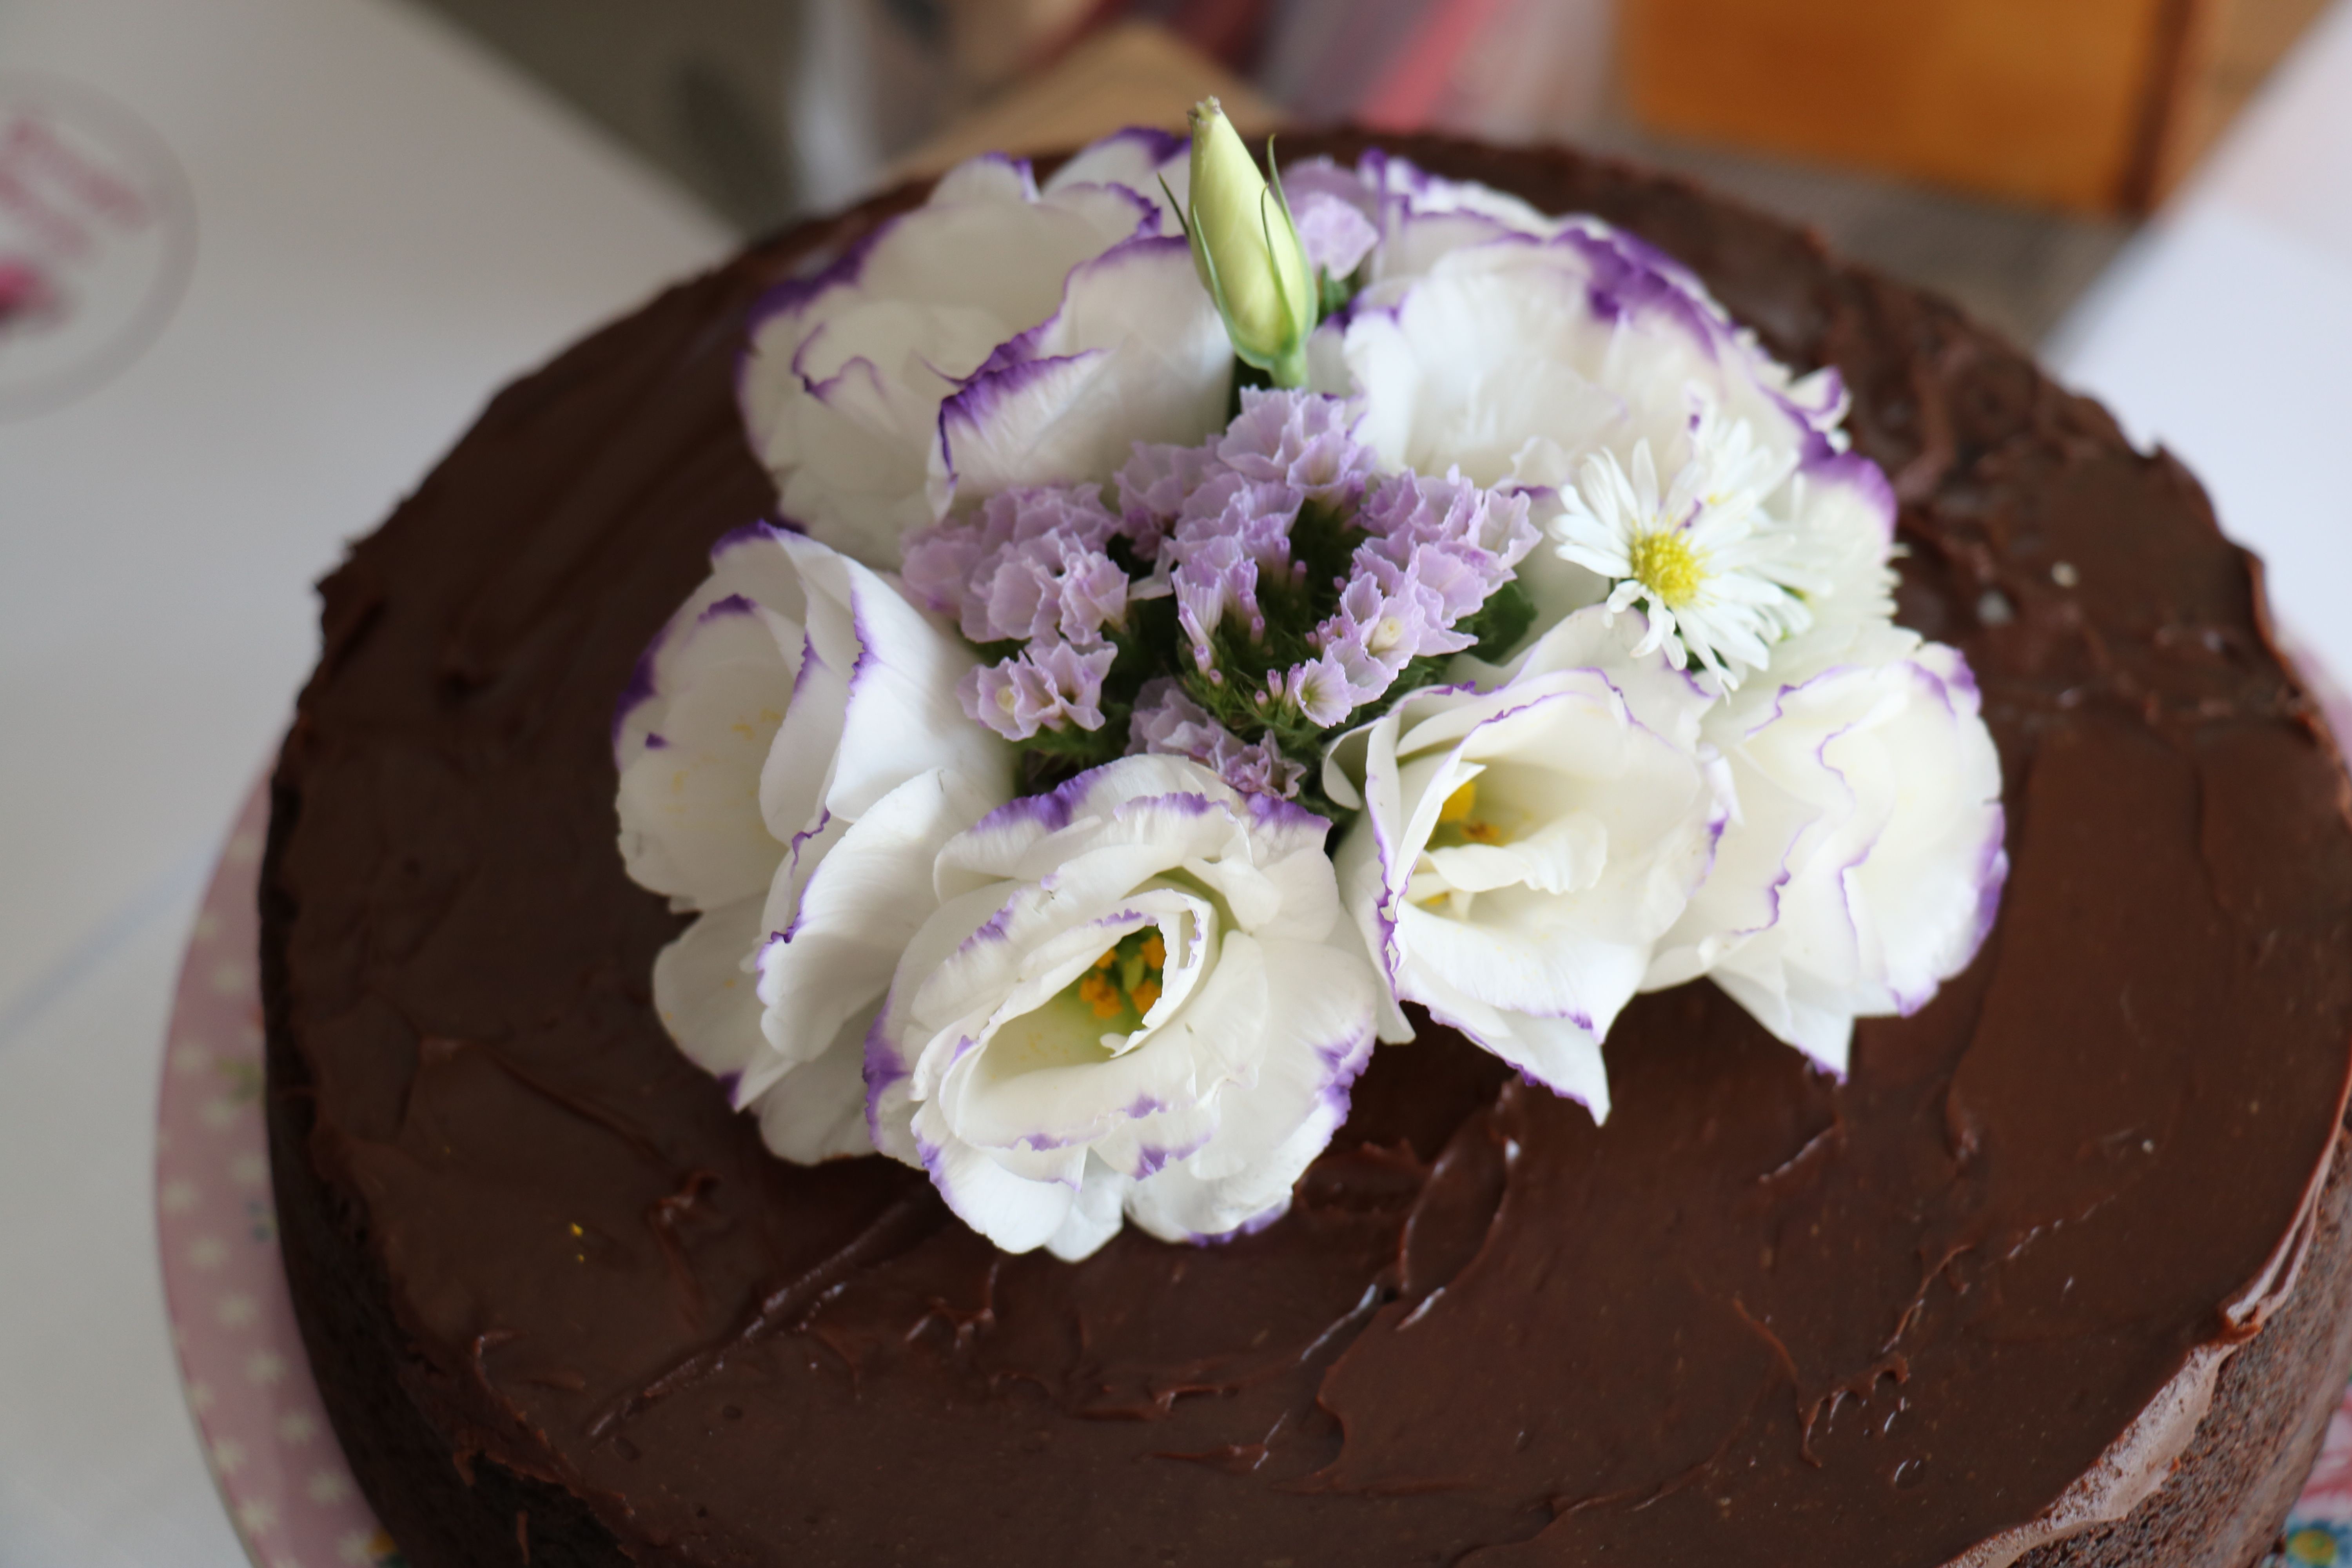 Flowers on chocolate mud cake by Graceful Blooms Mortdale events florist